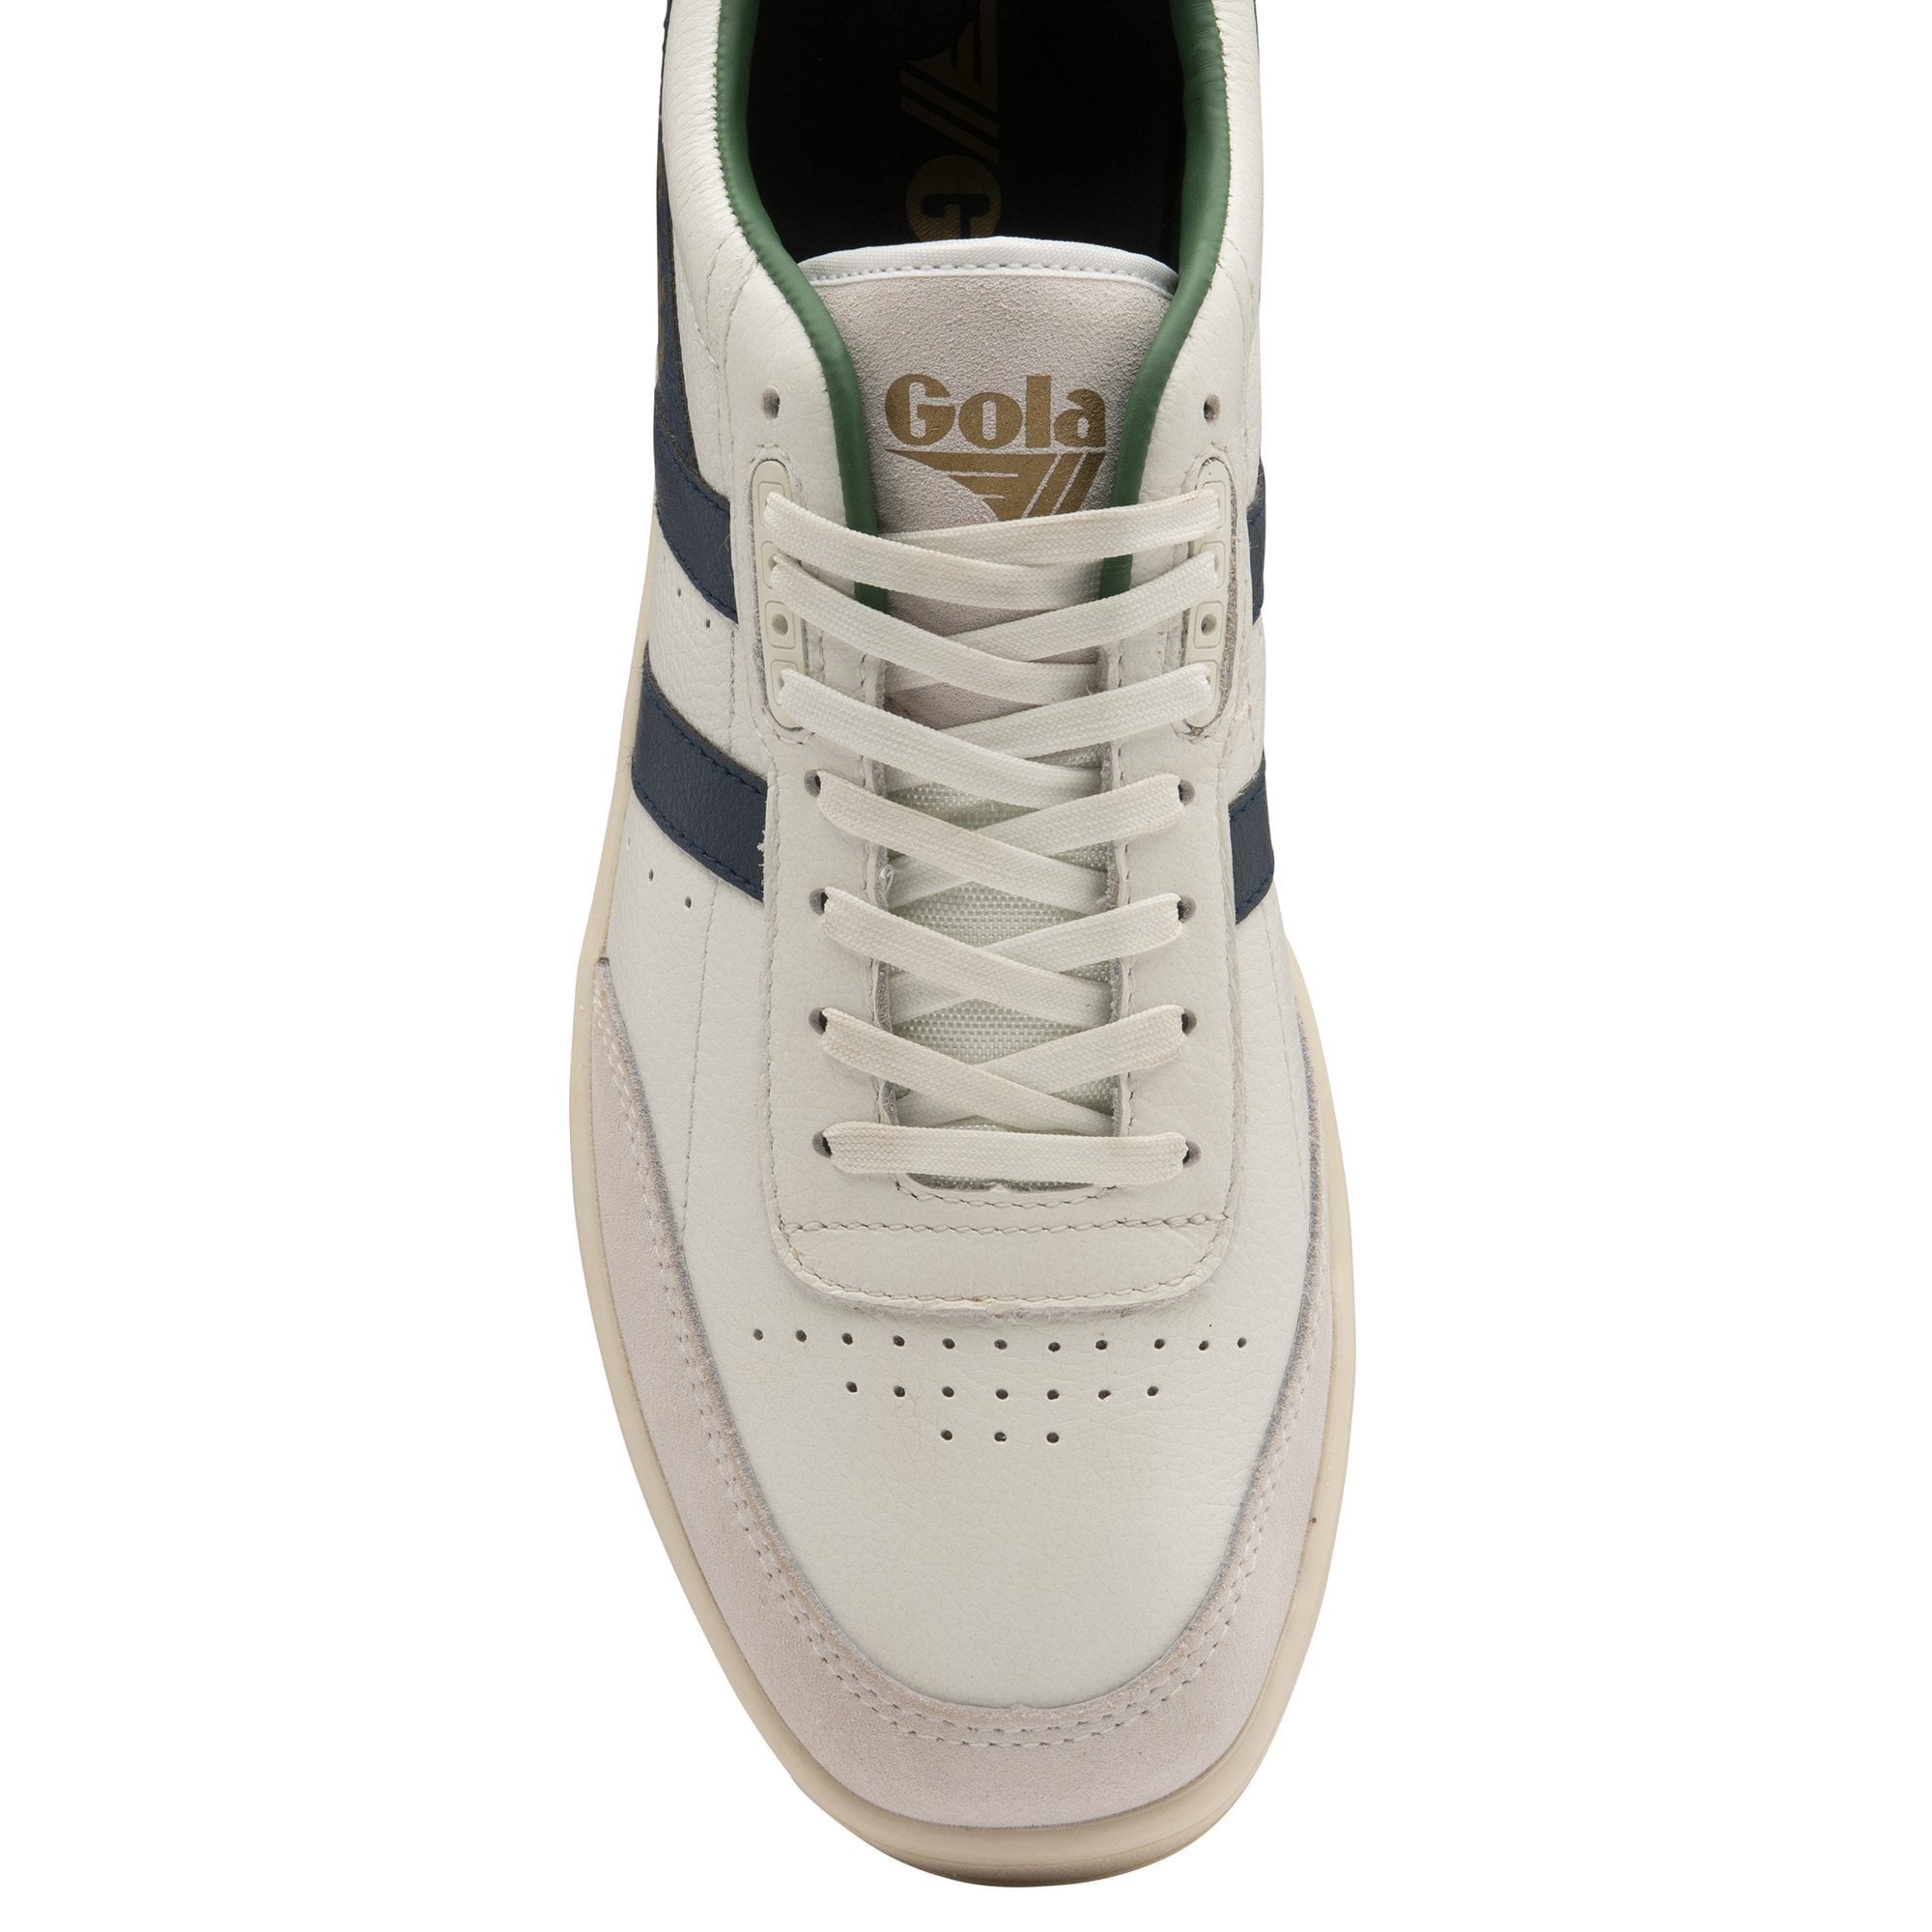 Classics Contact Leather Sneaker: White/Navy/Green